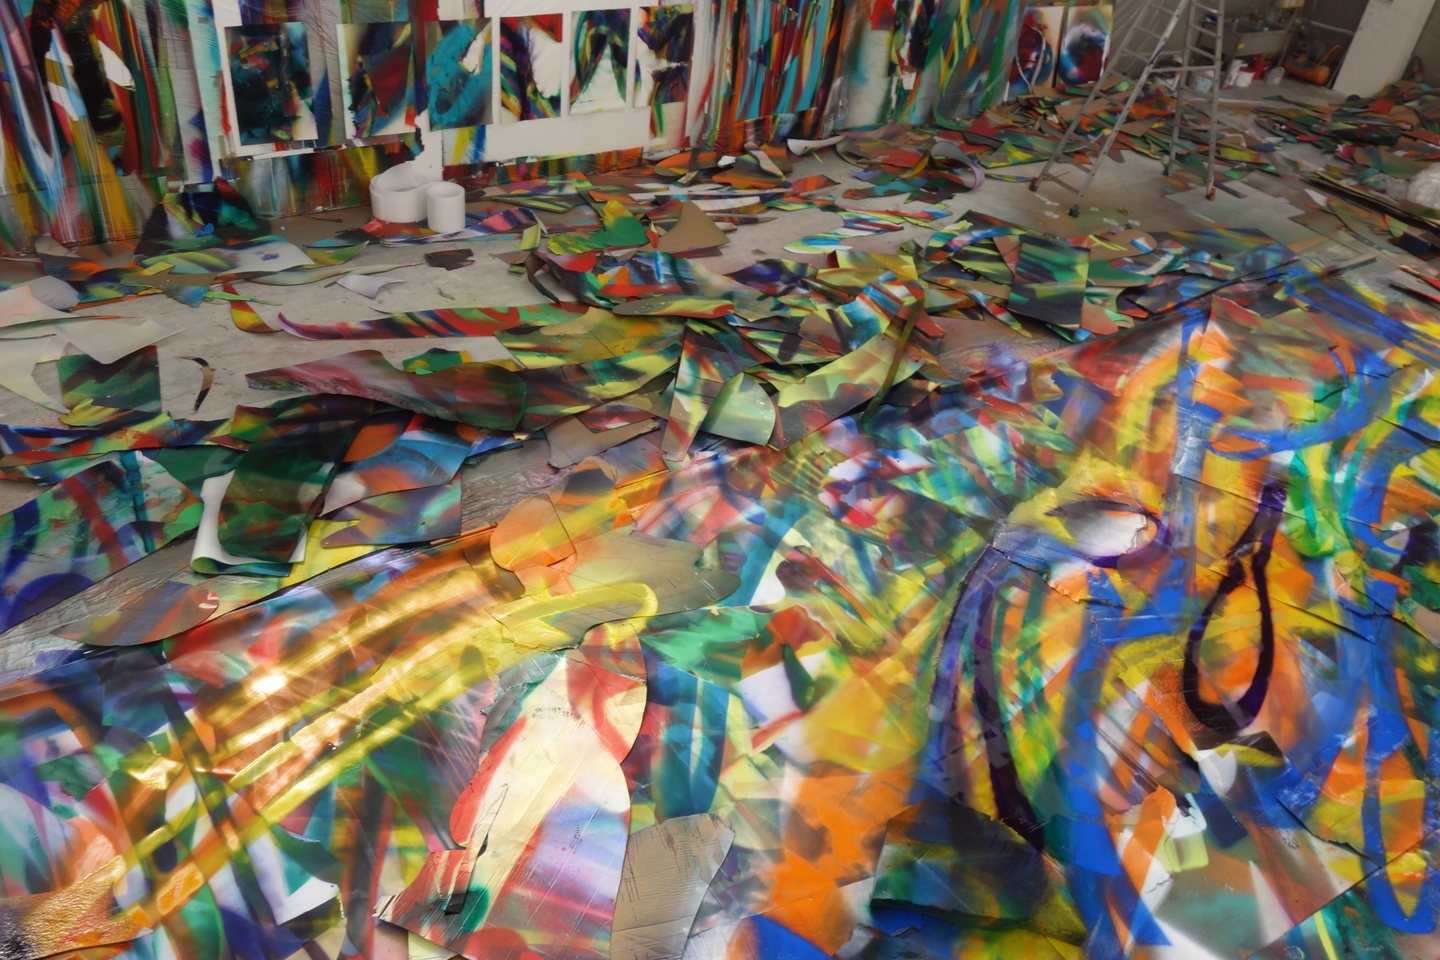 An artist's studio whose walls and floor are covered in sweeping, colorful brushstrokes and fragments of paintings